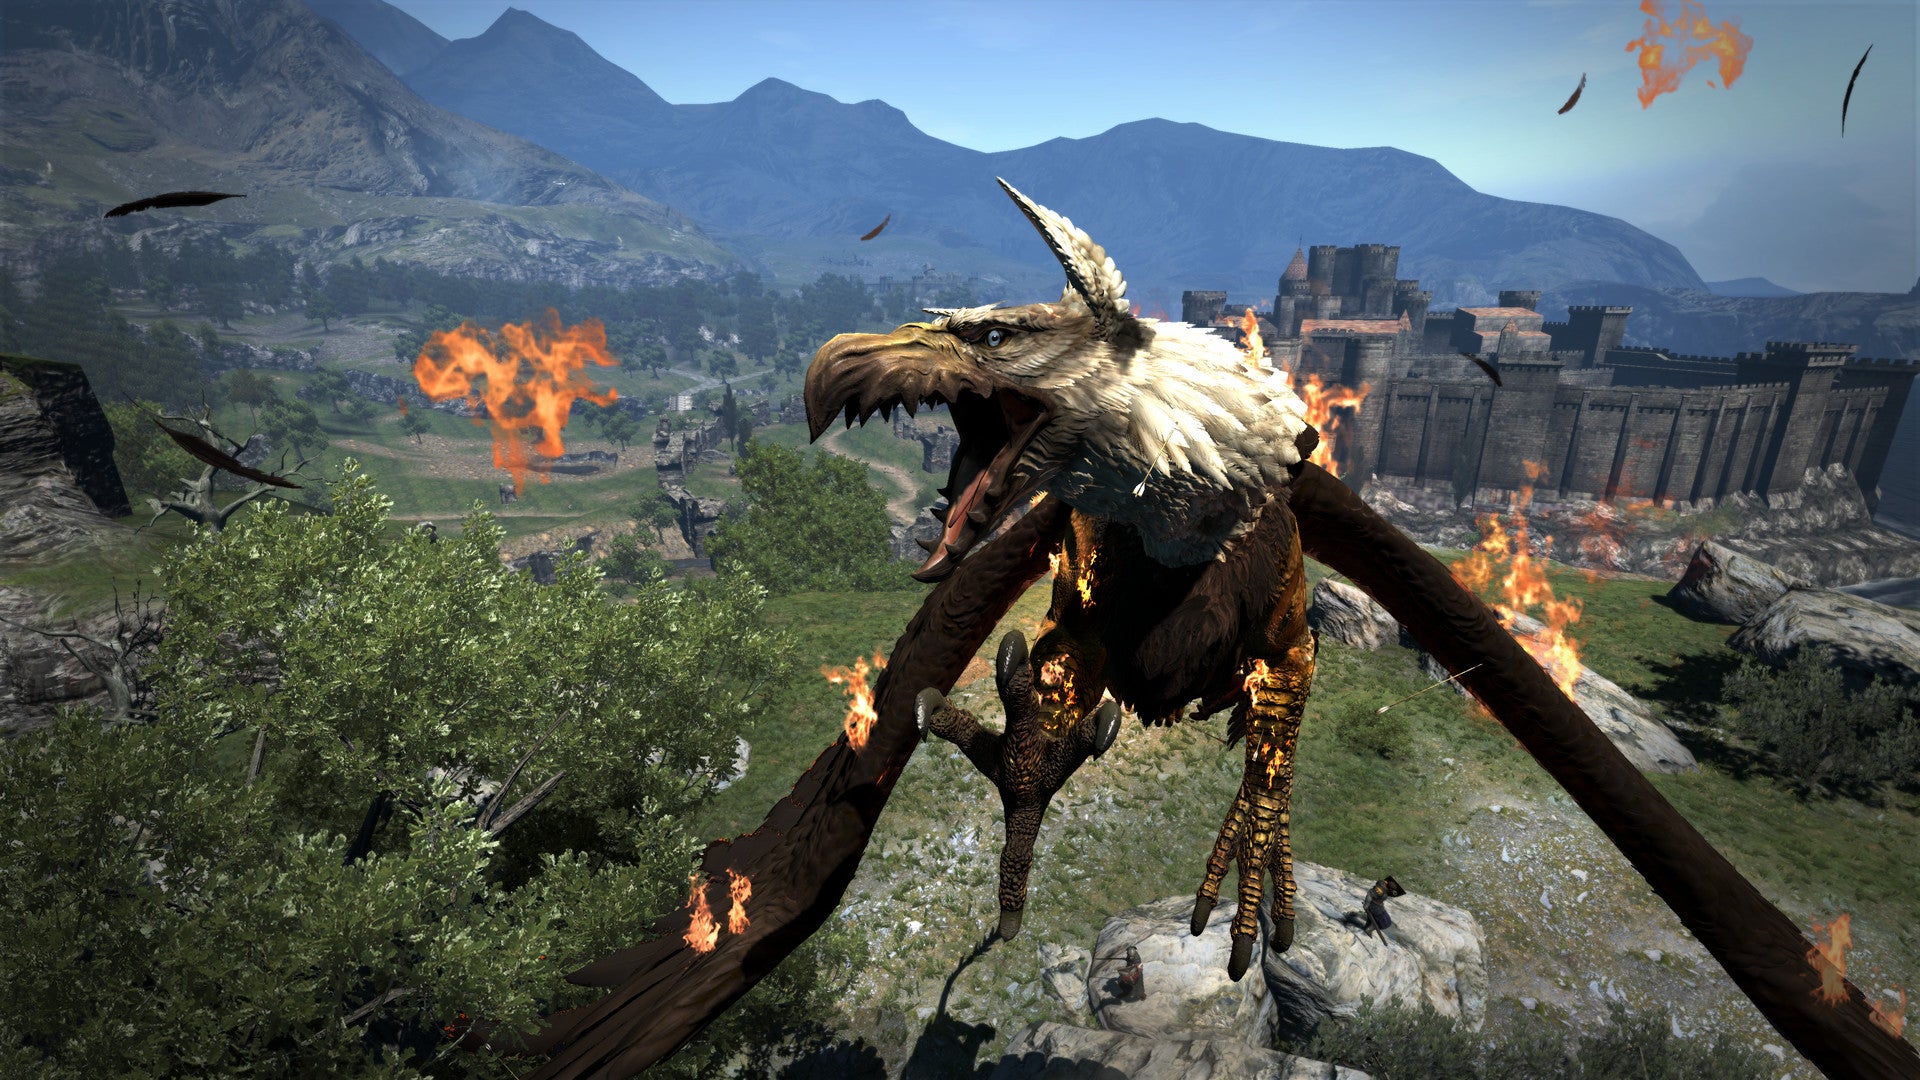 Screenshot of Dragon's Dogma gameplay showing a flying creature.